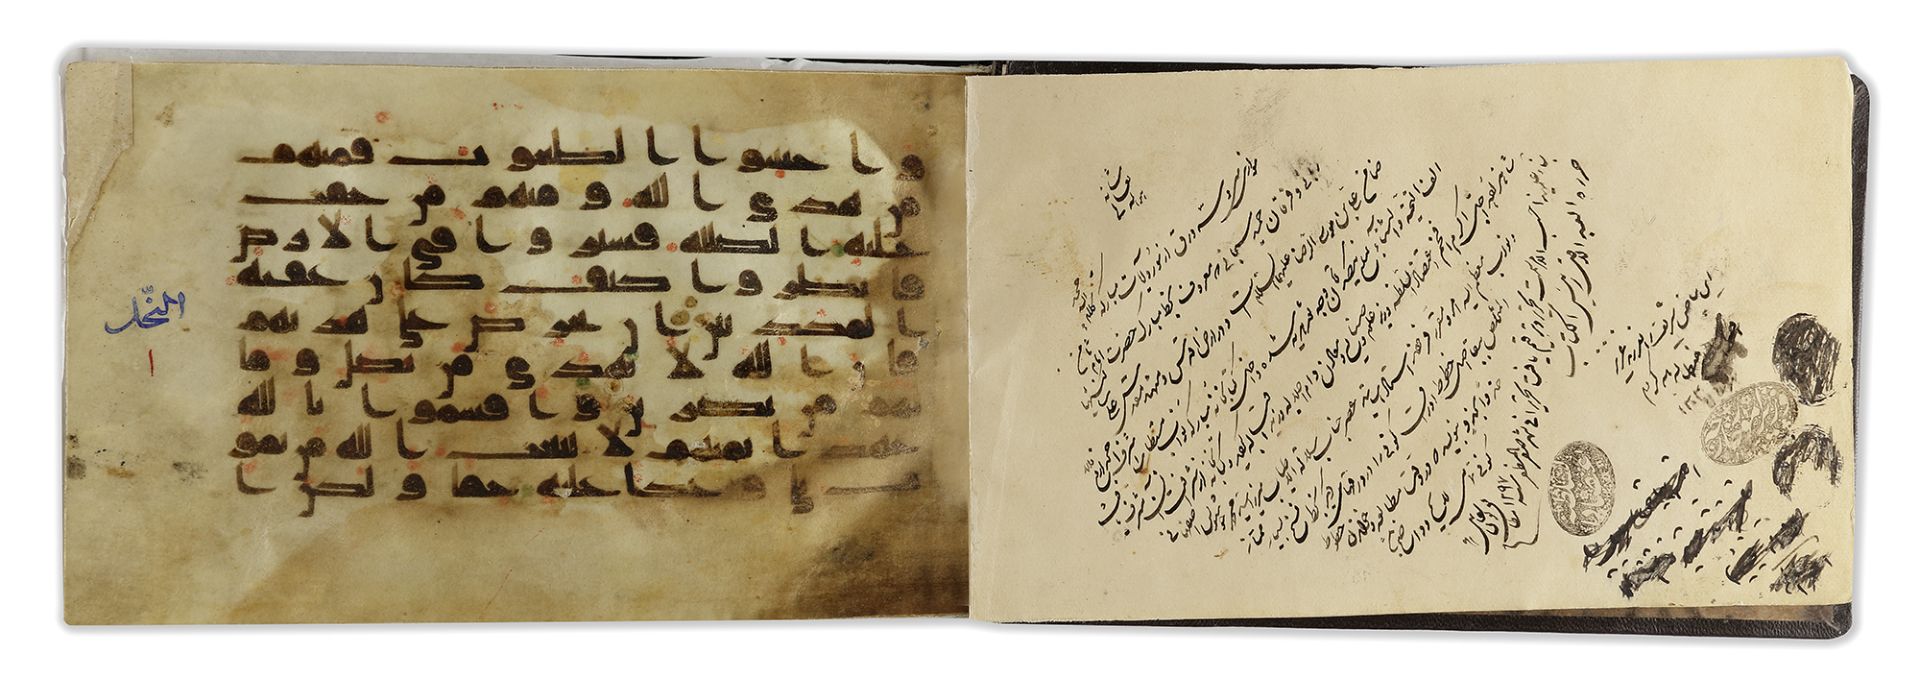 A KUFIC QURAN SECTION NEAR EAST OR NORTH AFRICA, 9TH CENTURY - Image 6 of 9